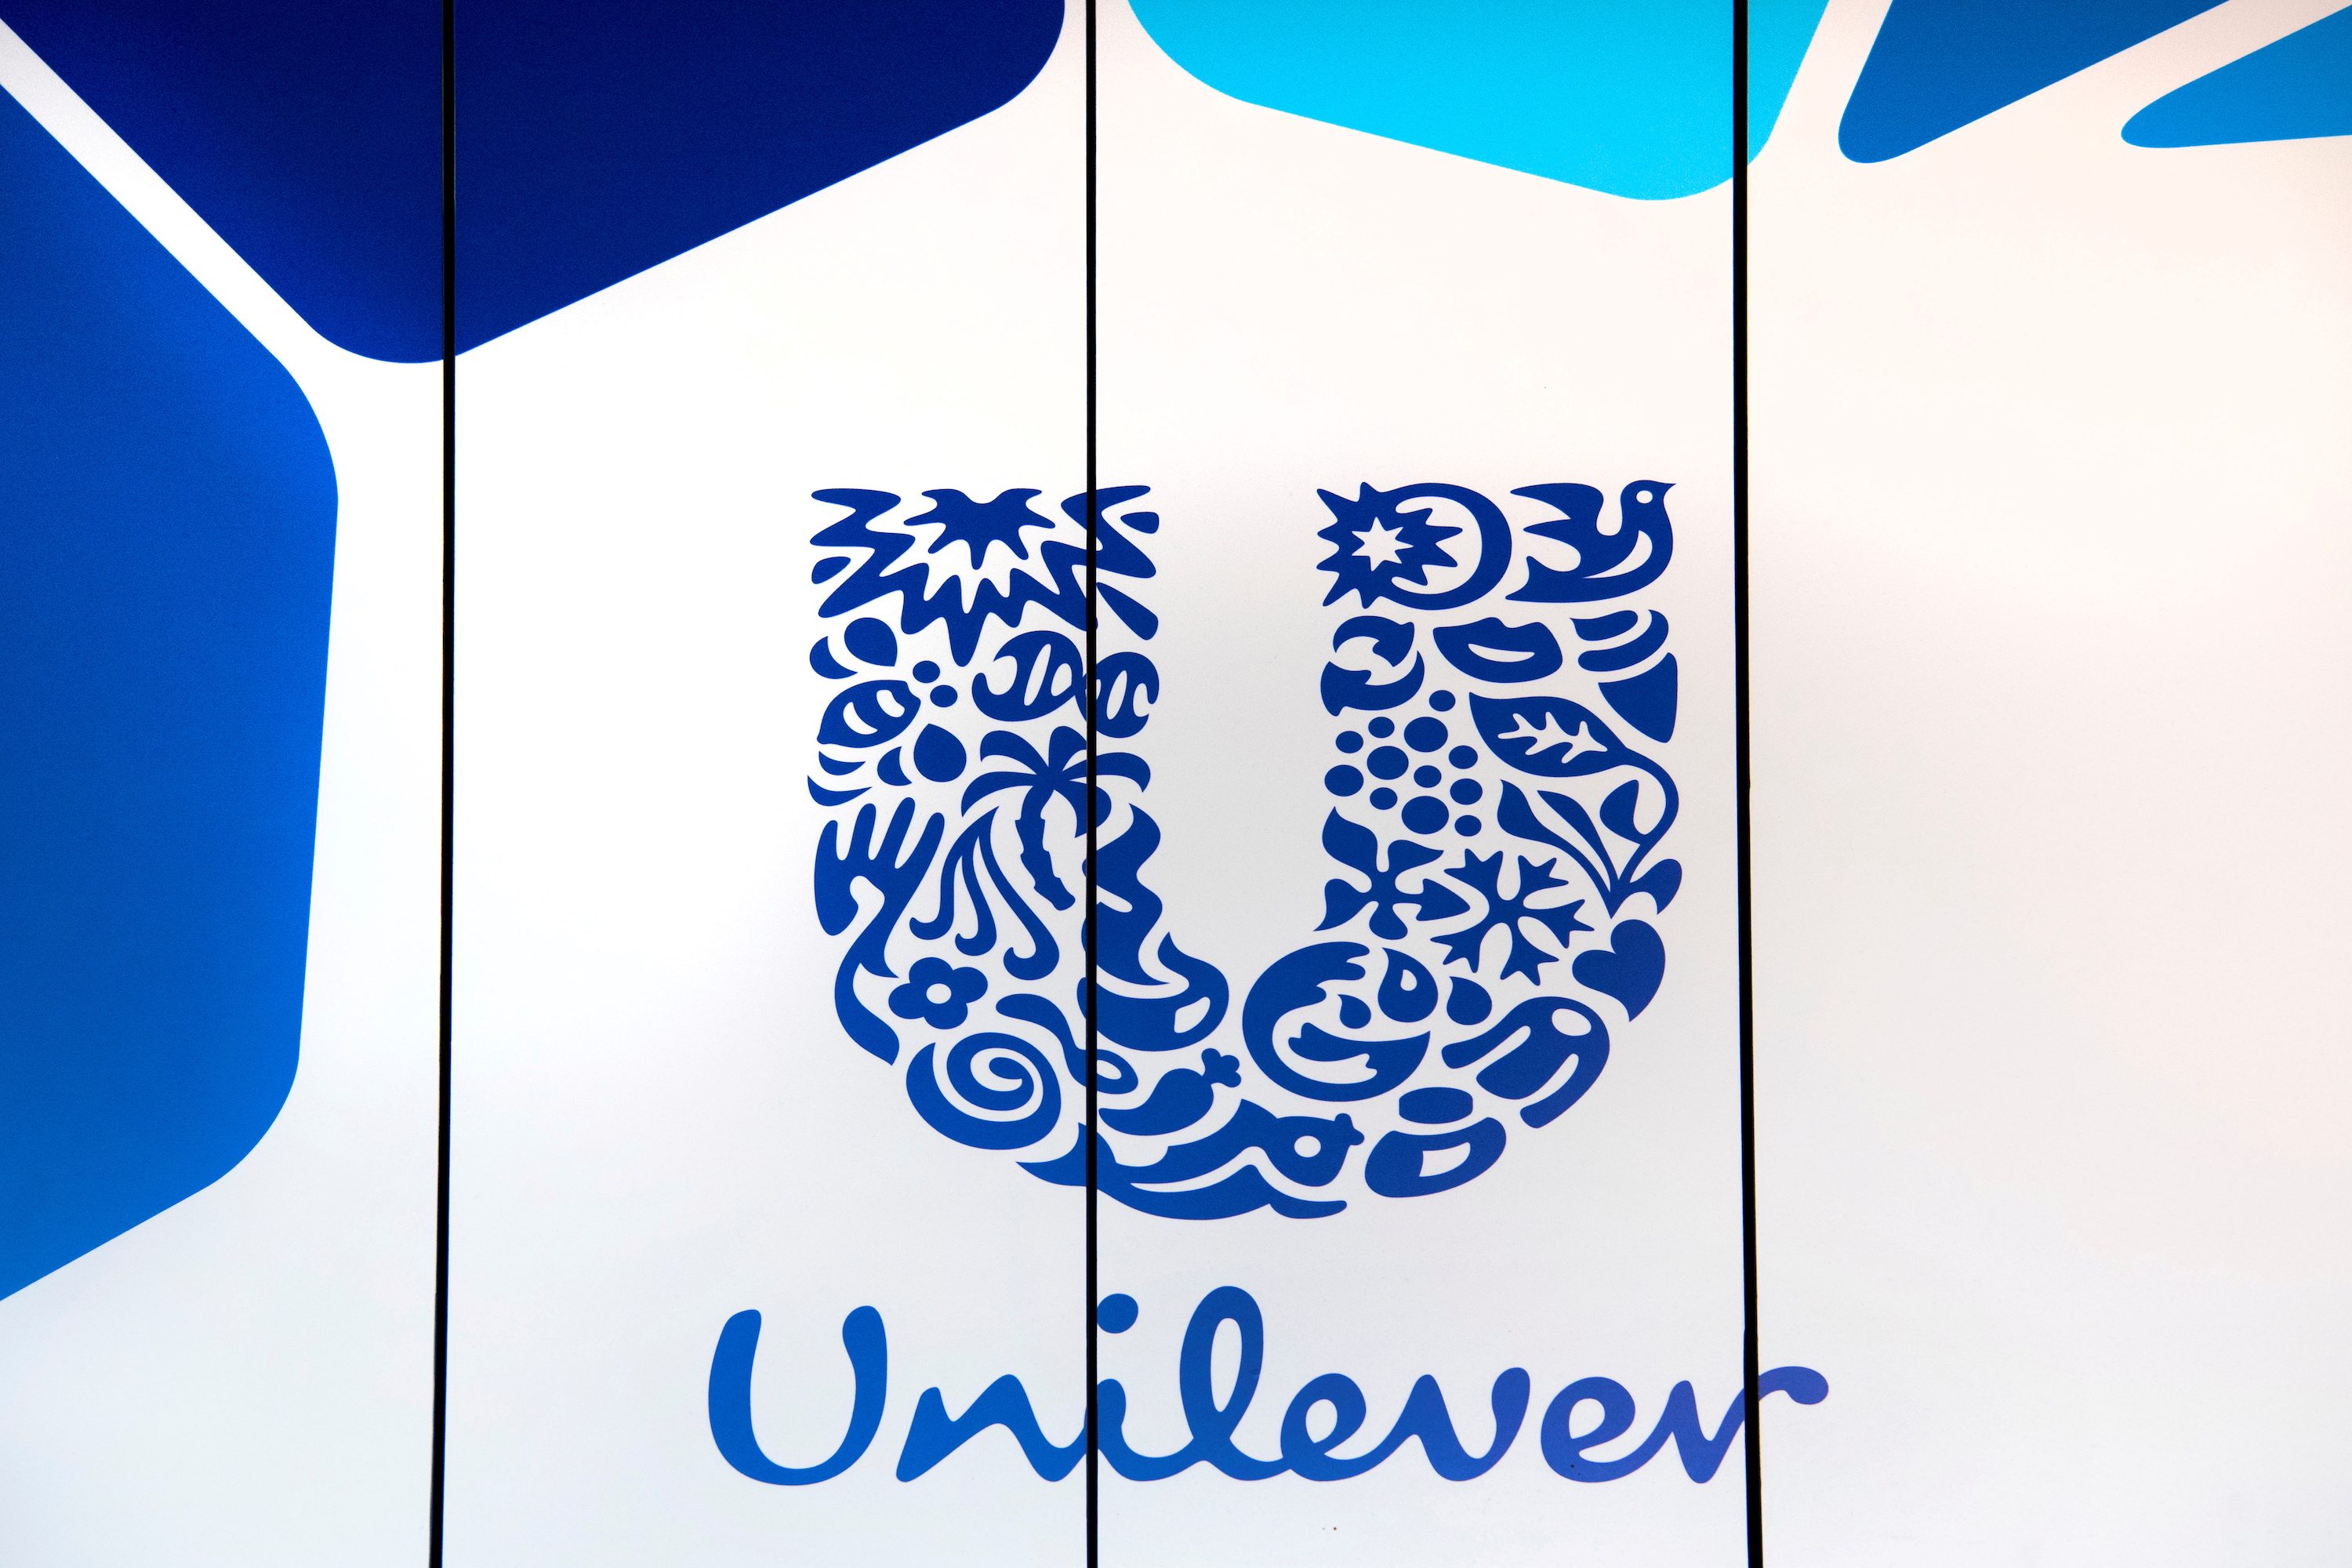 Inflation worries overshadow Unilever’s strong first half, hit shares